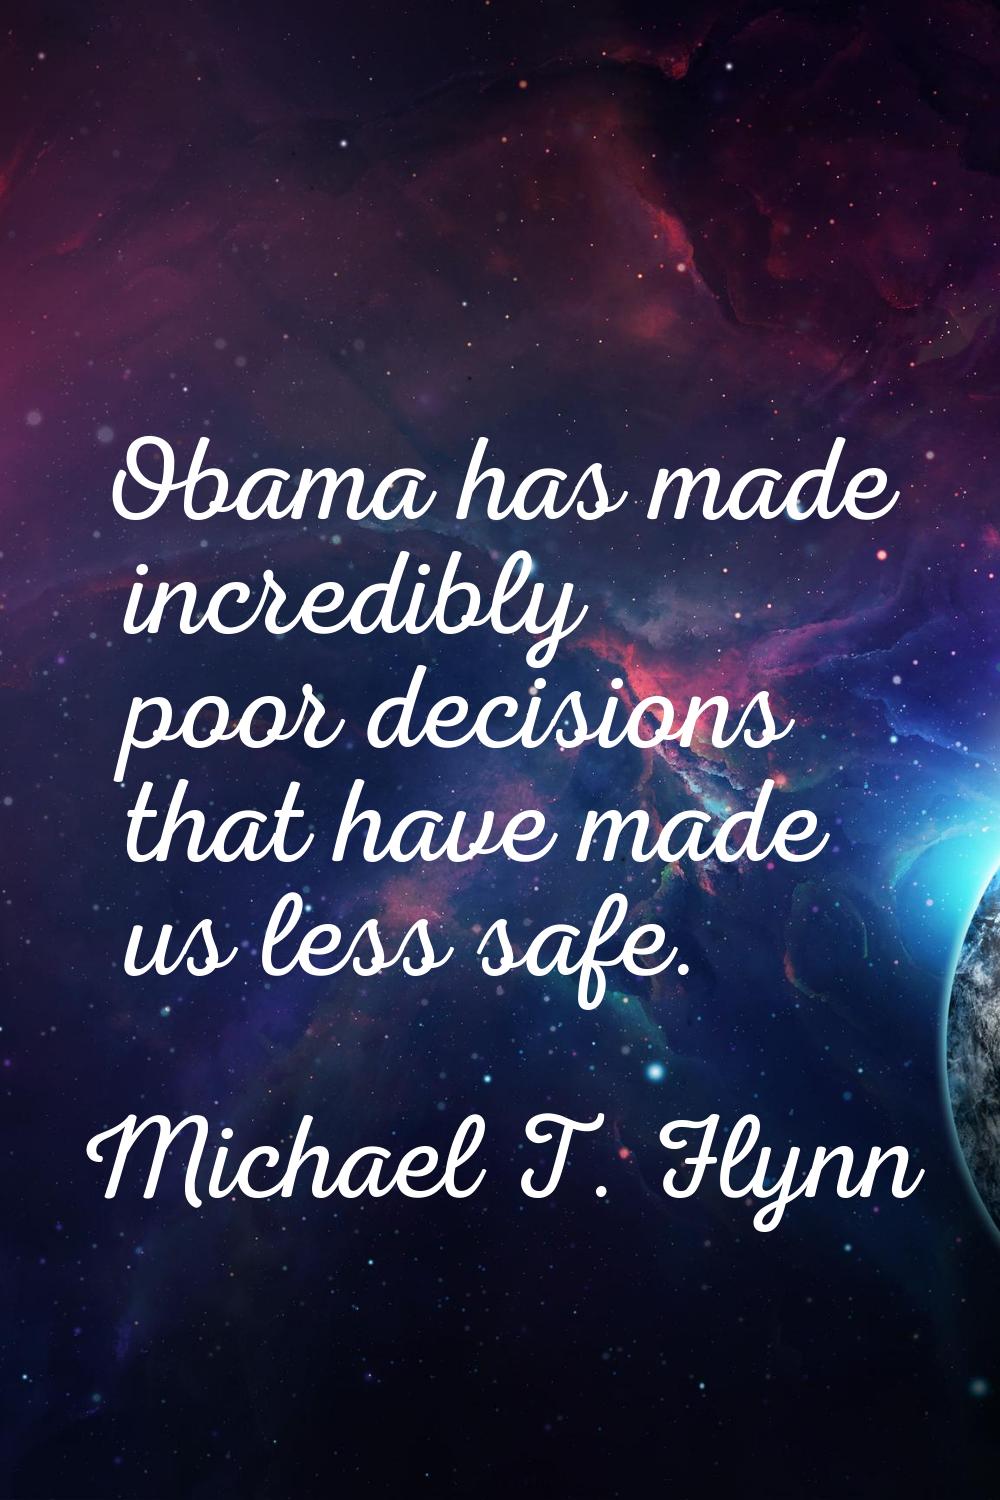 Obama has made incredibly poor decisions that have made us less safe.